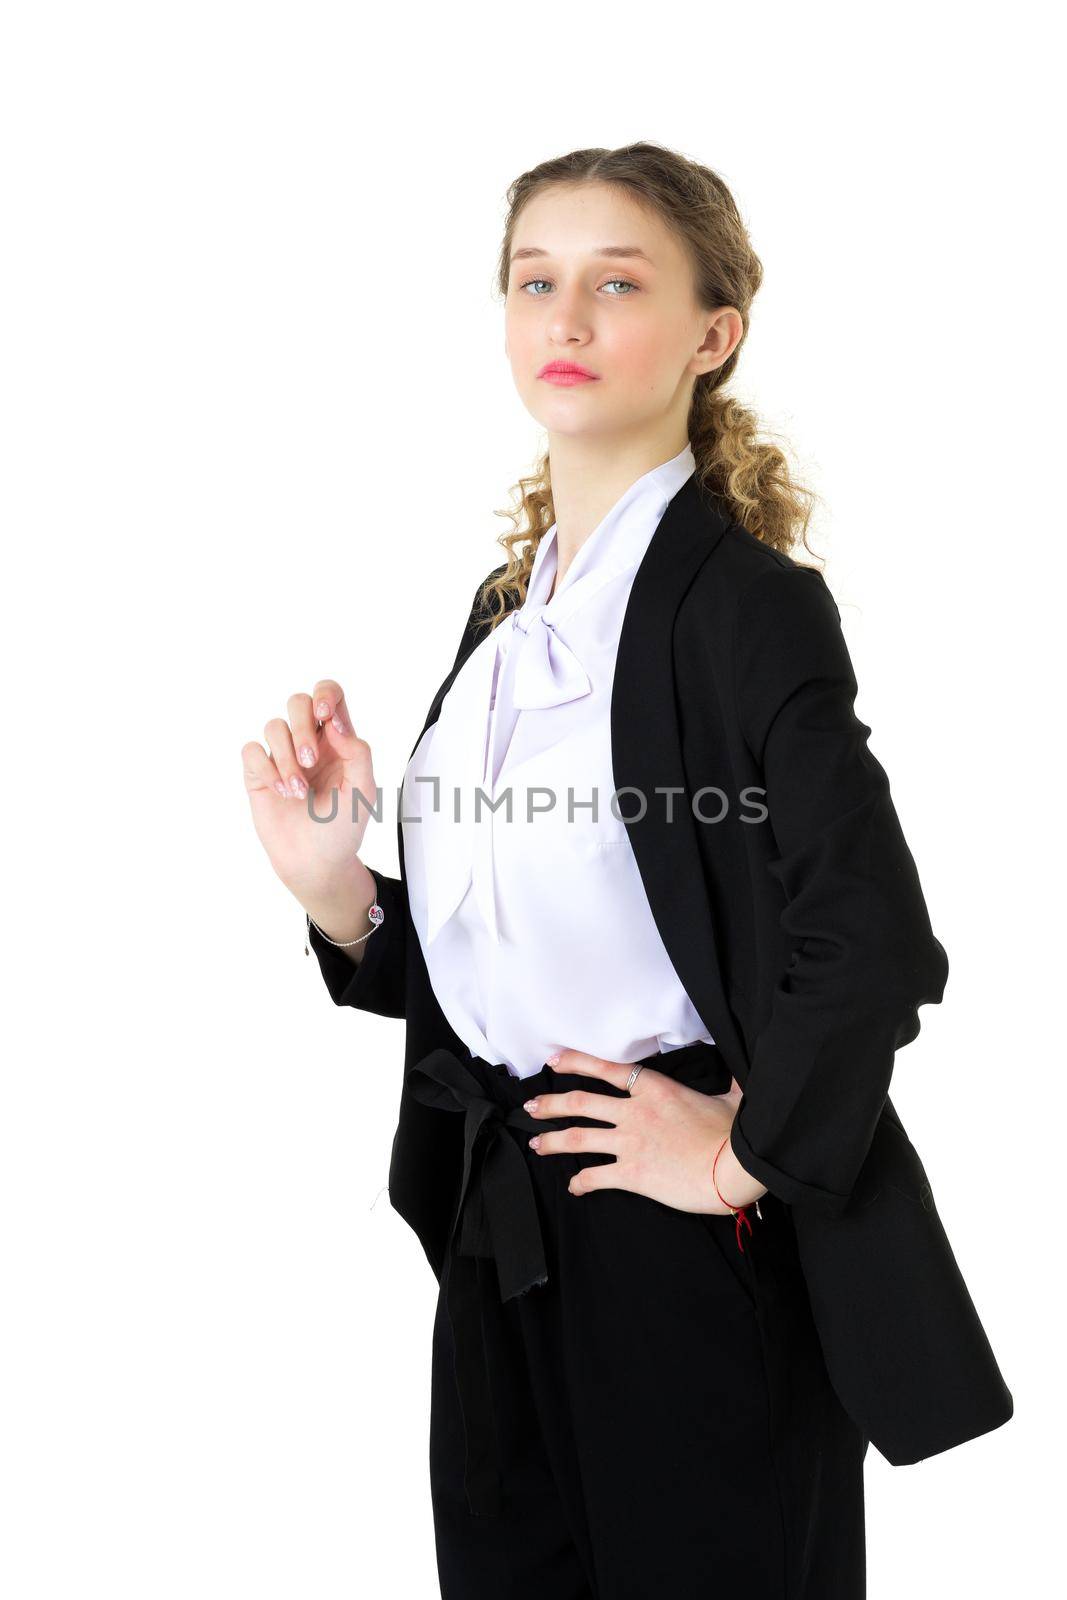 Stylish, model girl, student, in a strict black suit. Portrait of attractive emotional young business woman in black jacket and white blouse looking at camera while standing against isolated white background